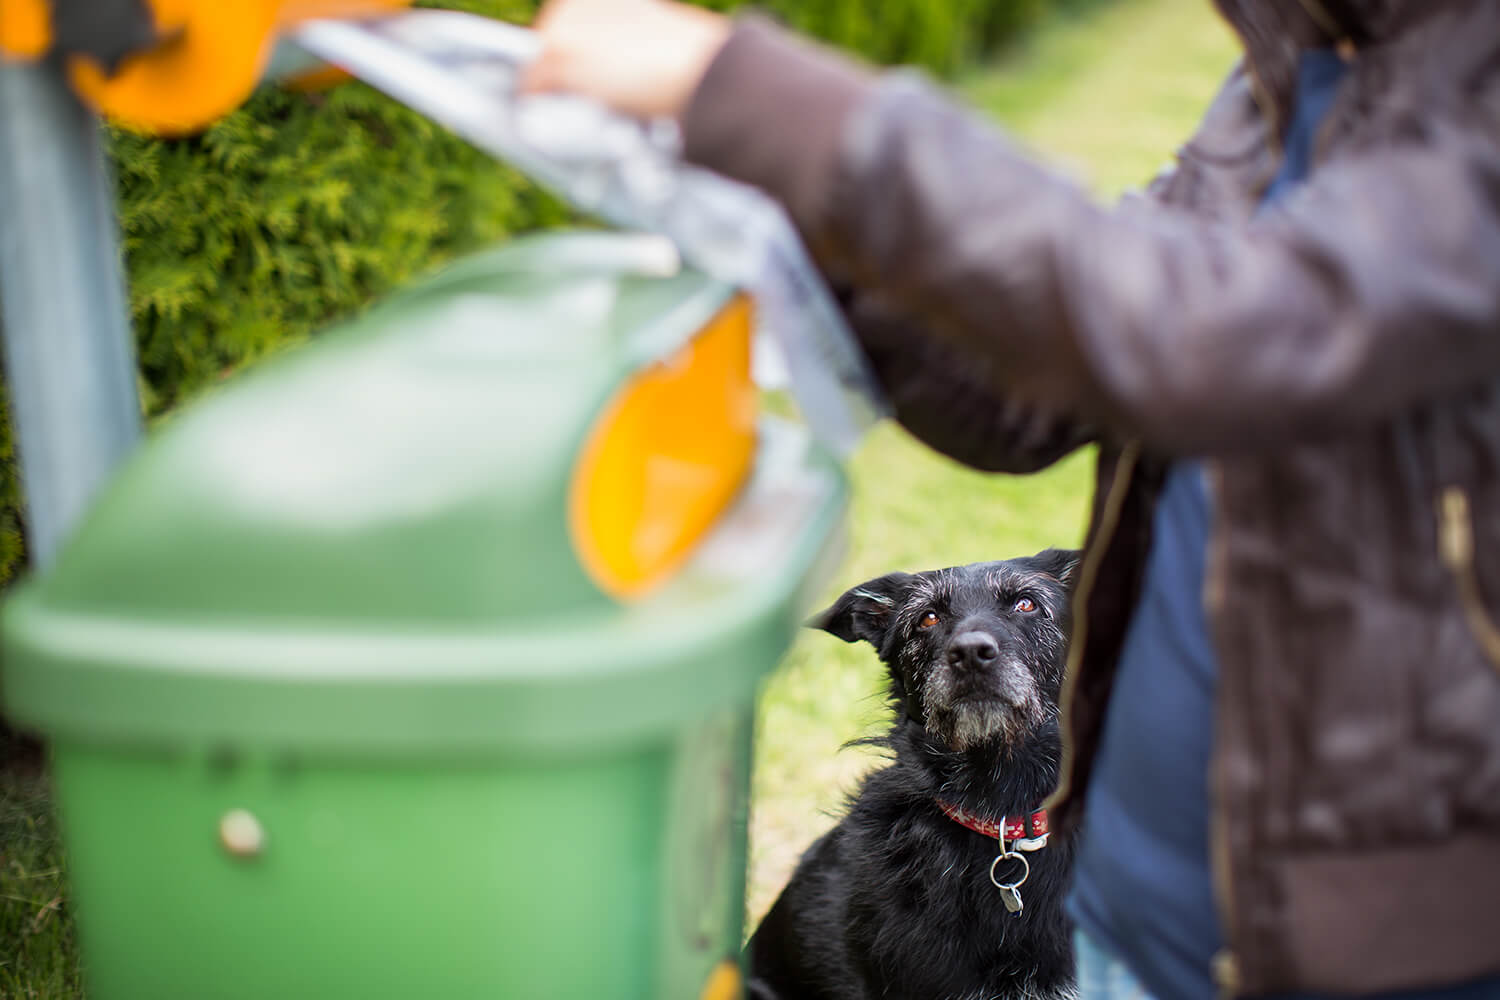 Is It Illegal To Put Dog Poop In The Garbage?